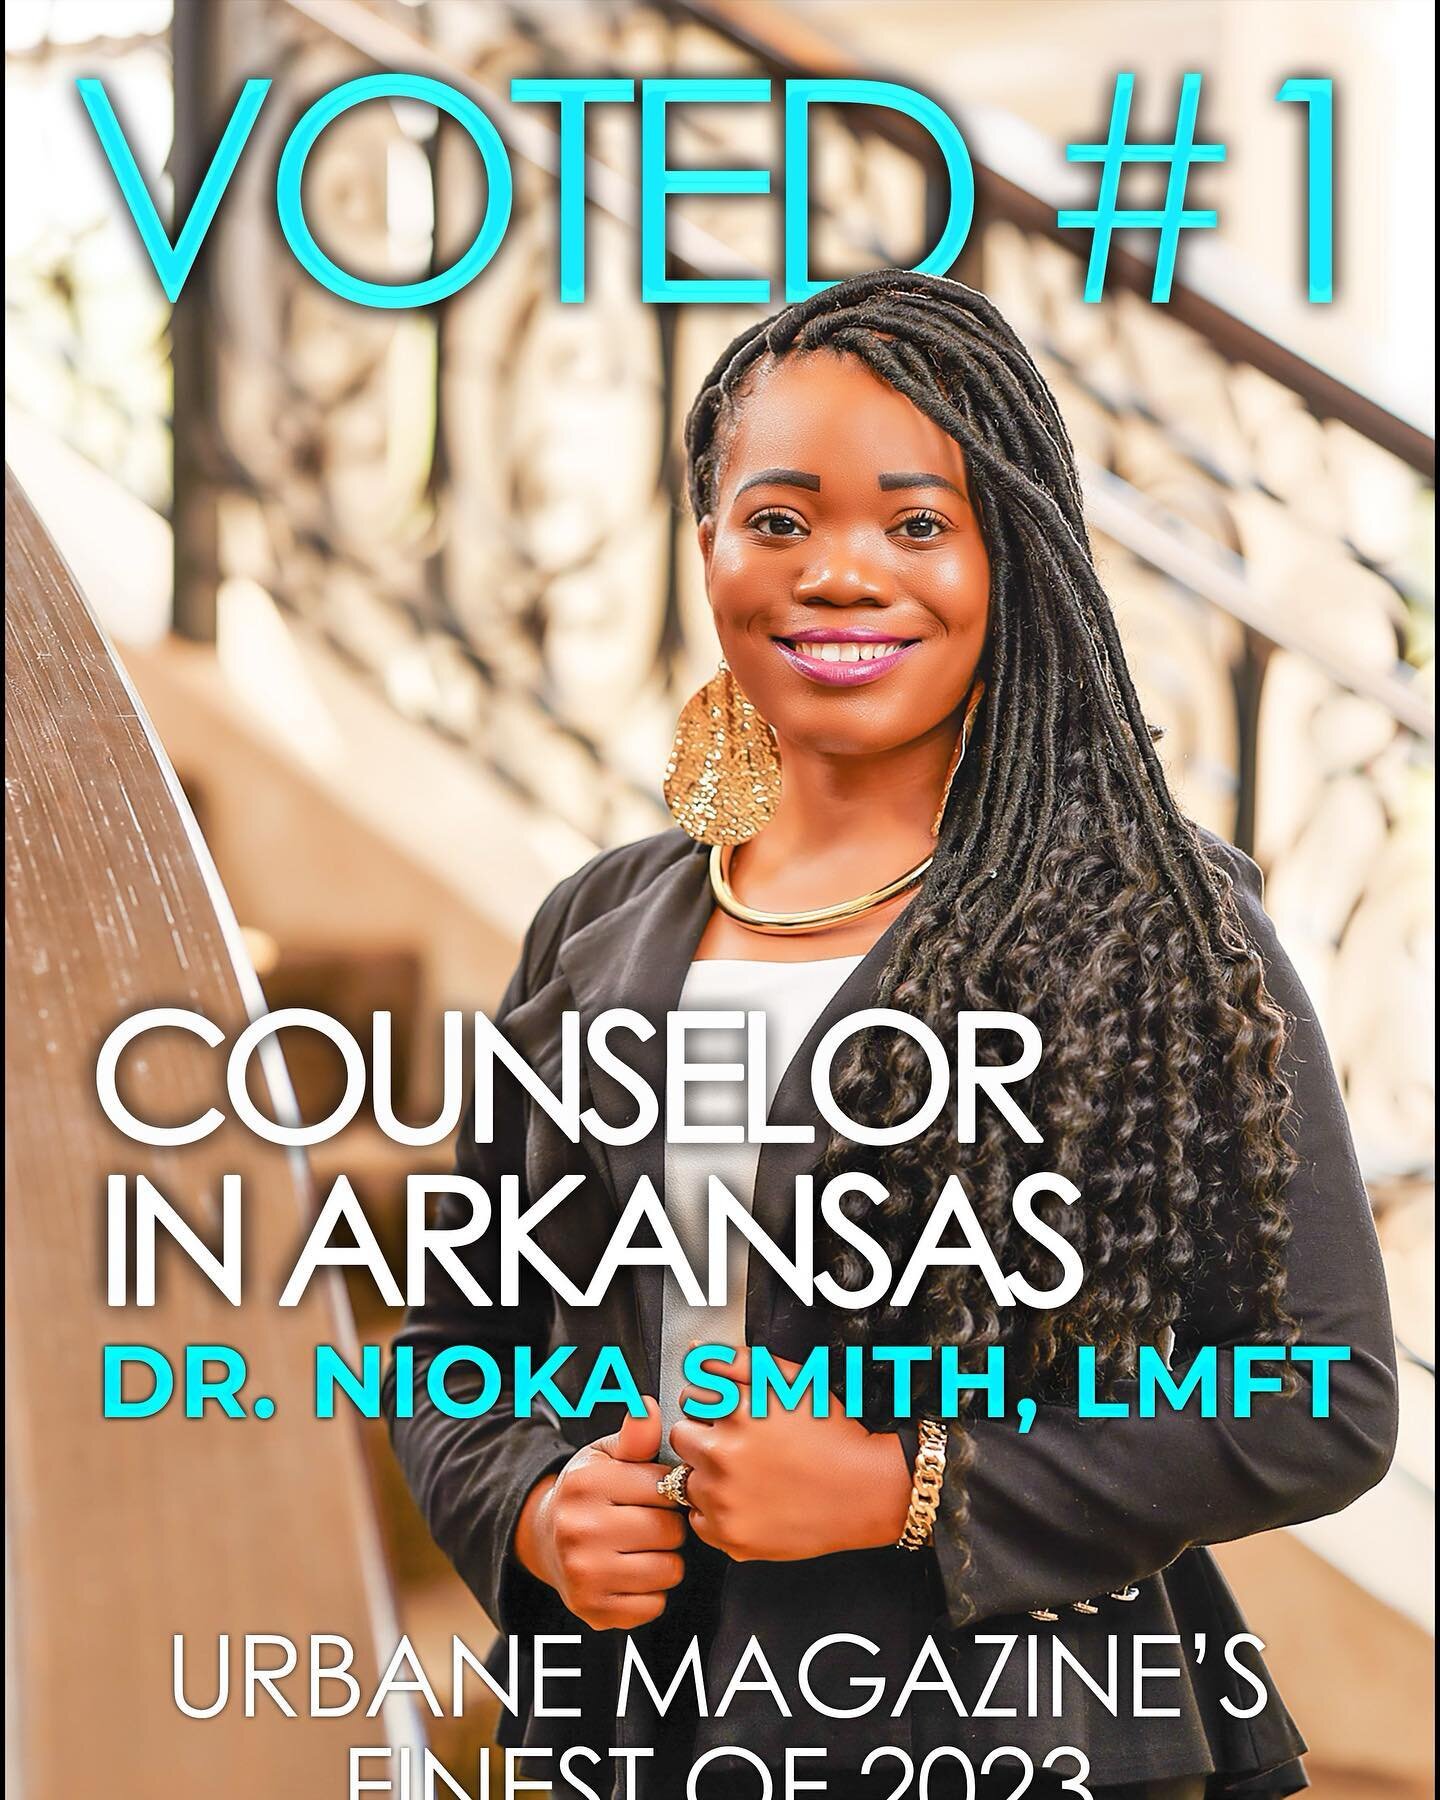 Congratulations to our very own! 👏🏾🤩💓 Voted #1 Counselor in the State of Arkansas 🙌🏽🥳 Help us congratulate this small town girl with a colossal  size mission for helping others break free and overcome in so many areas of their lives. Dr. Nioka